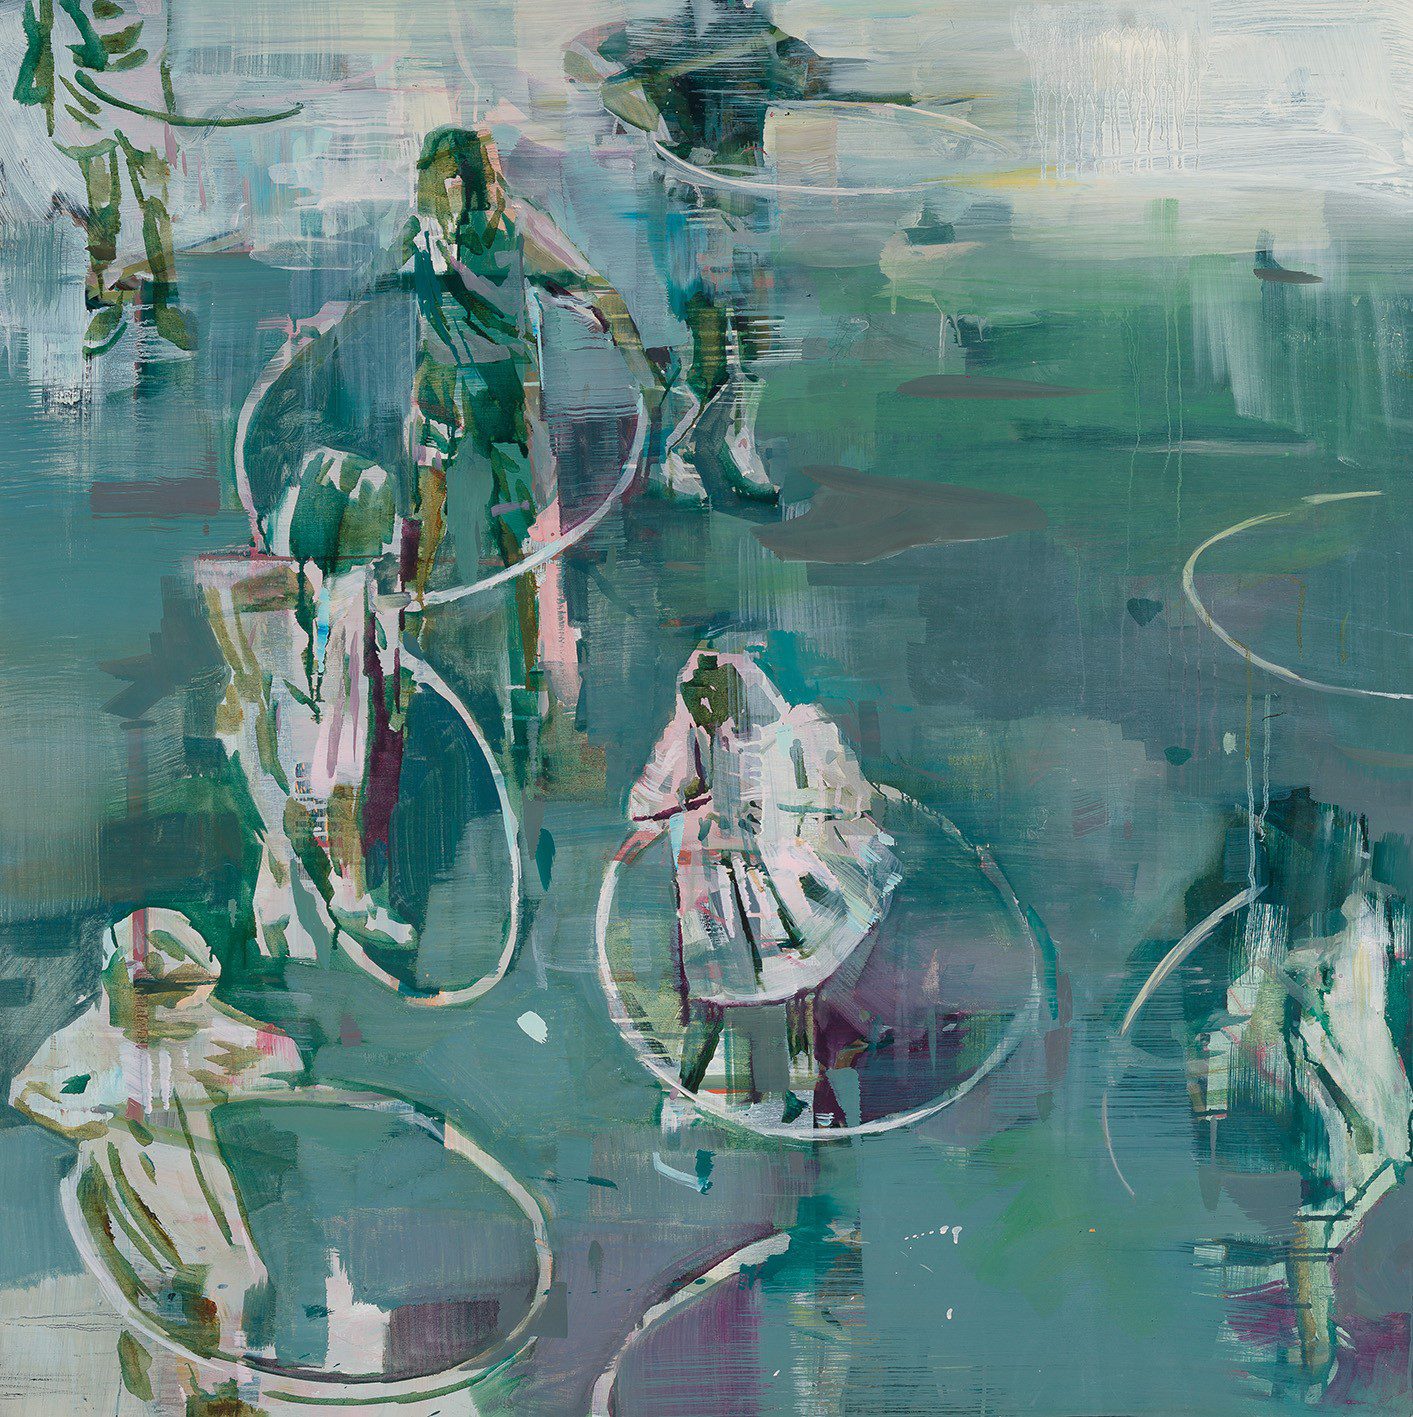 Katherine Le Hardy, The Rules of the Game, 2020, Oil on panel, 100 x 100cm. Courtesy of Candida Stevens